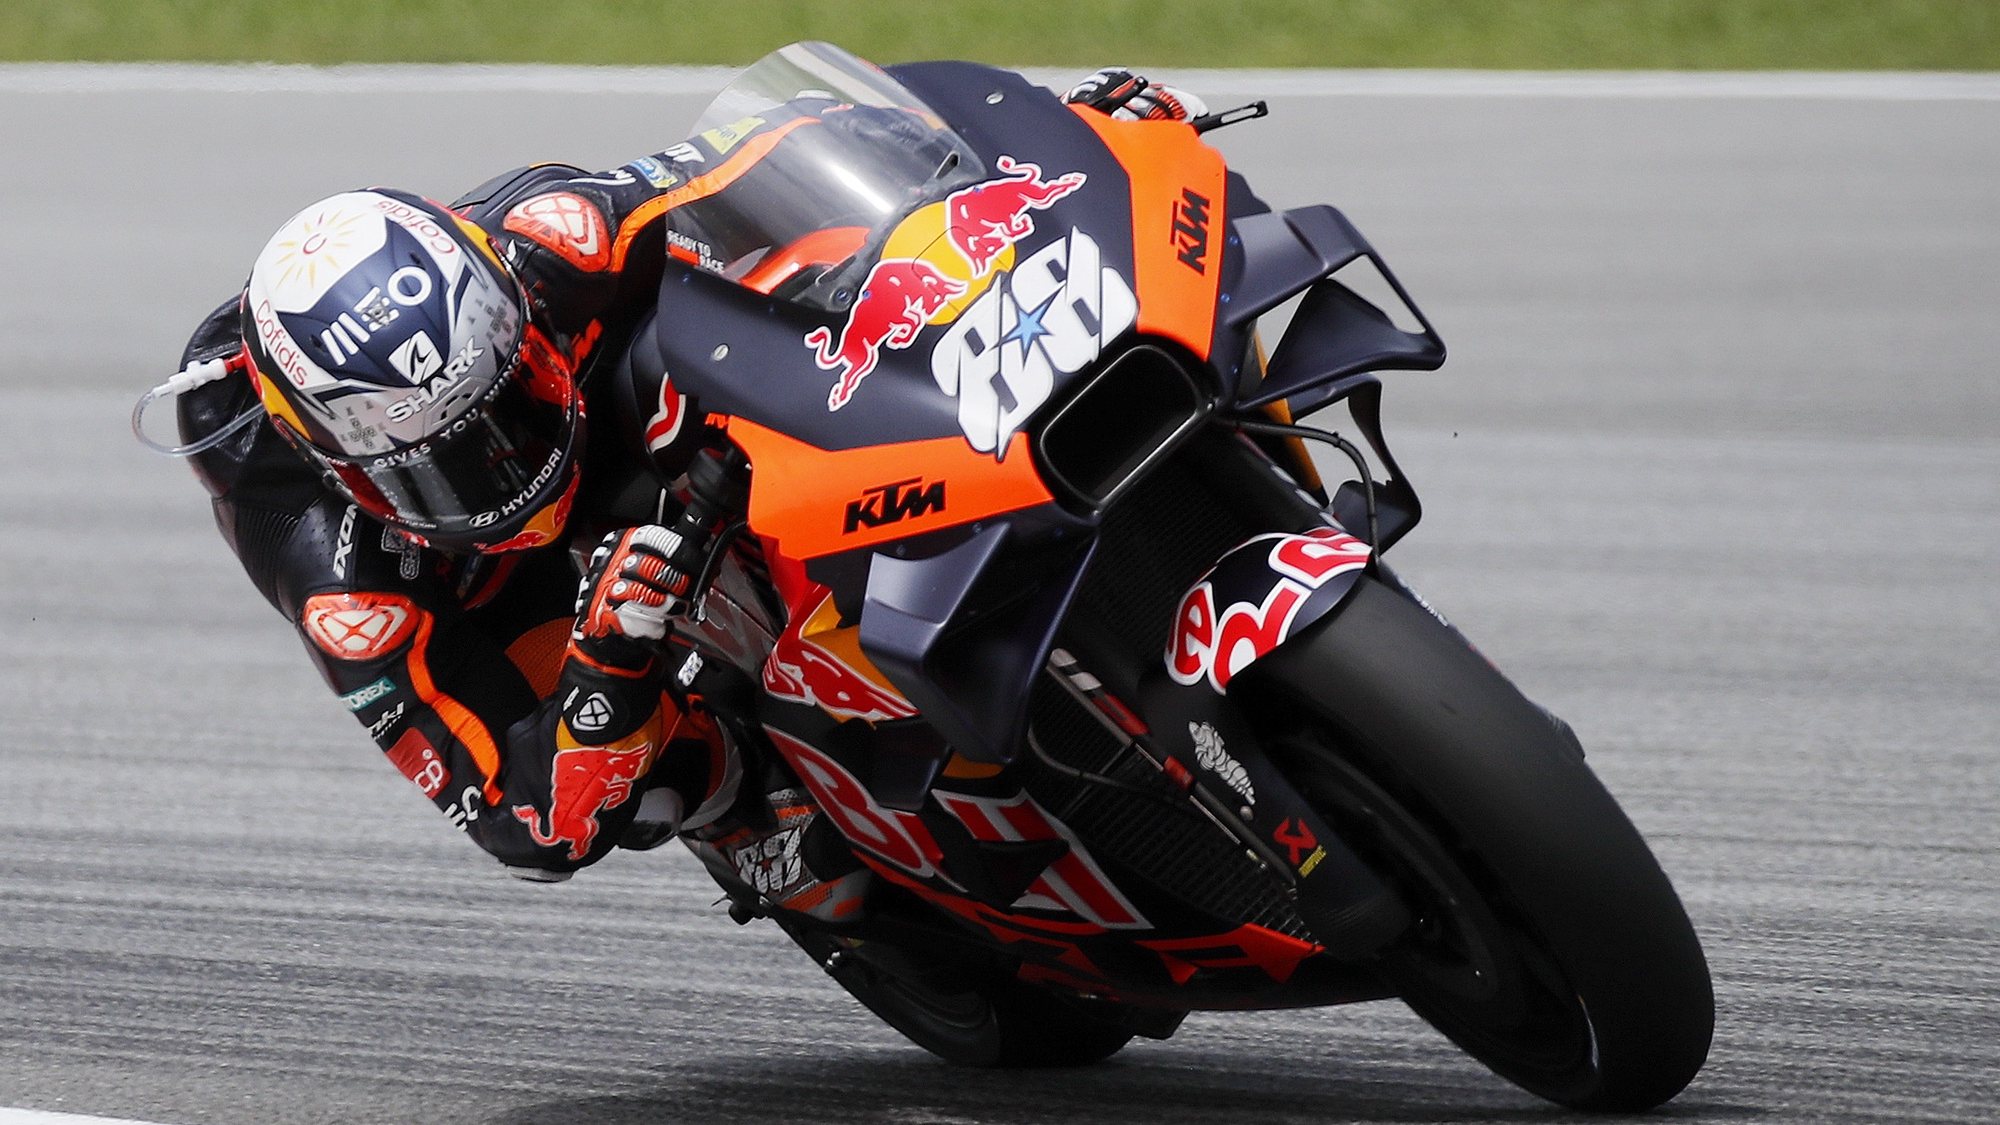 epa10256251 Portuguese rider Miguel Oliveira of Red Bull KTM Factory Racing in action during free practice session at the Malaysia Motorcycling Grand Prix in Sepang, Malaysia, 21 October 2022. The 2022 Malaysia Motorcycling Grand Prix will take place on 23 October.  EPA/FAZRY ISMAIL